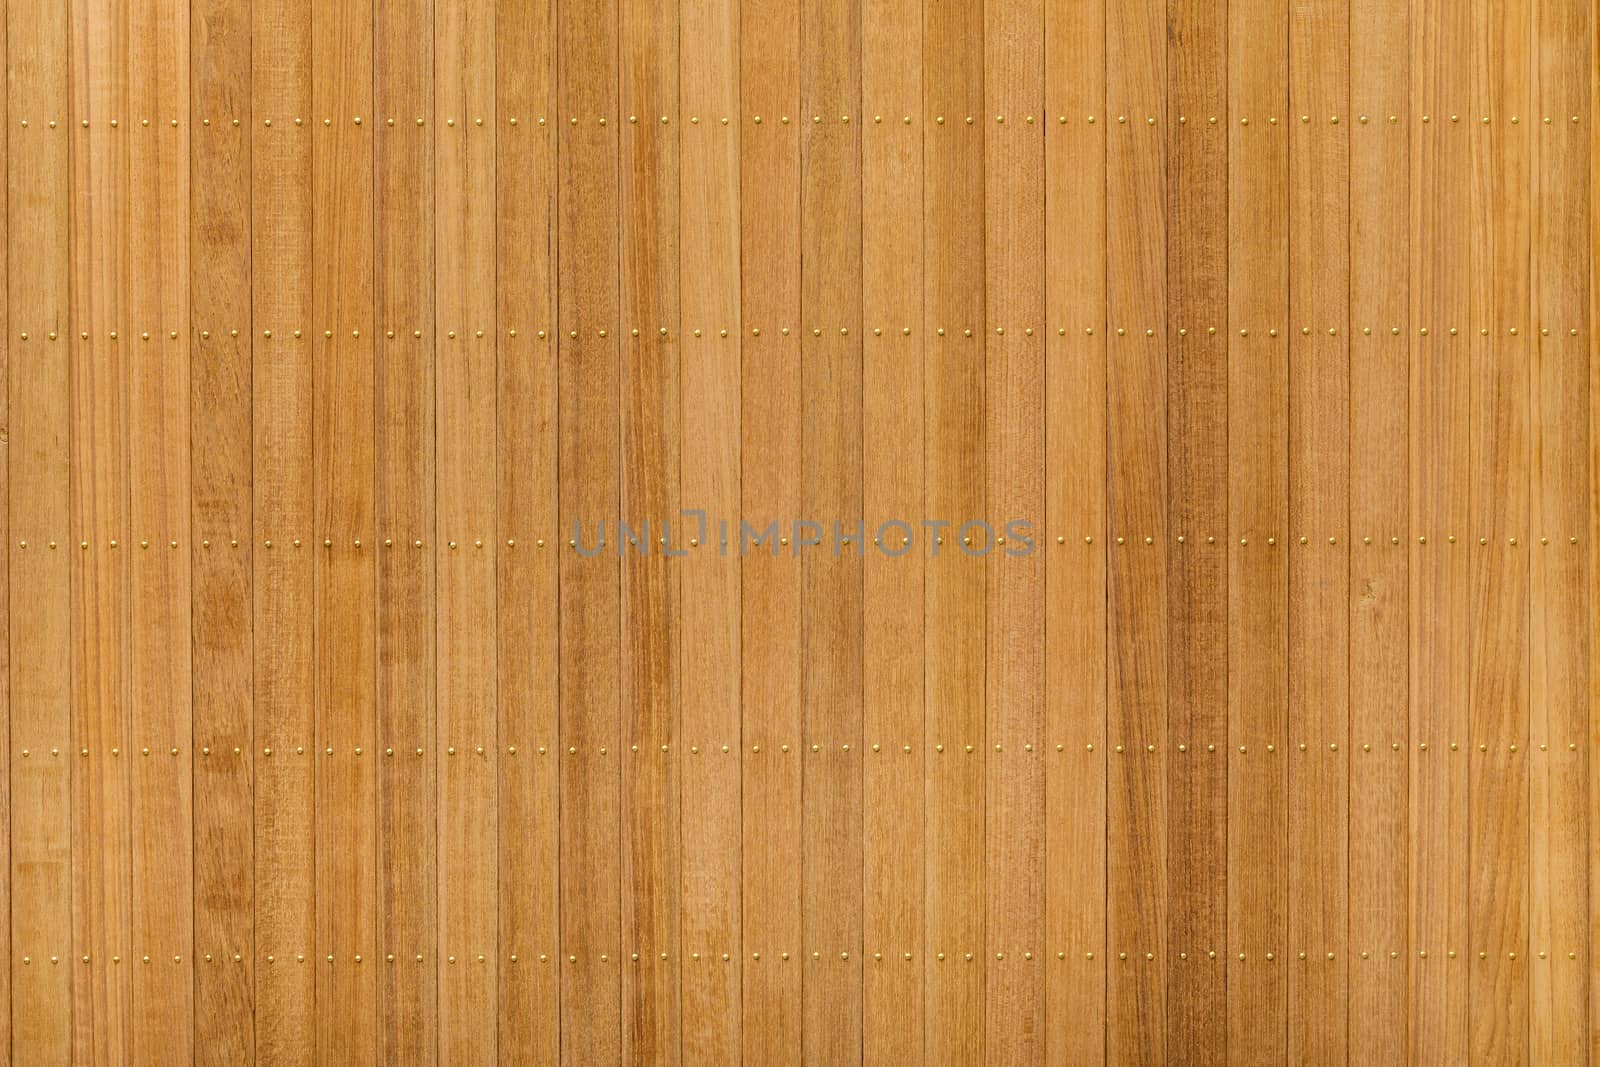 Teak wood panel with brass nail by smuay